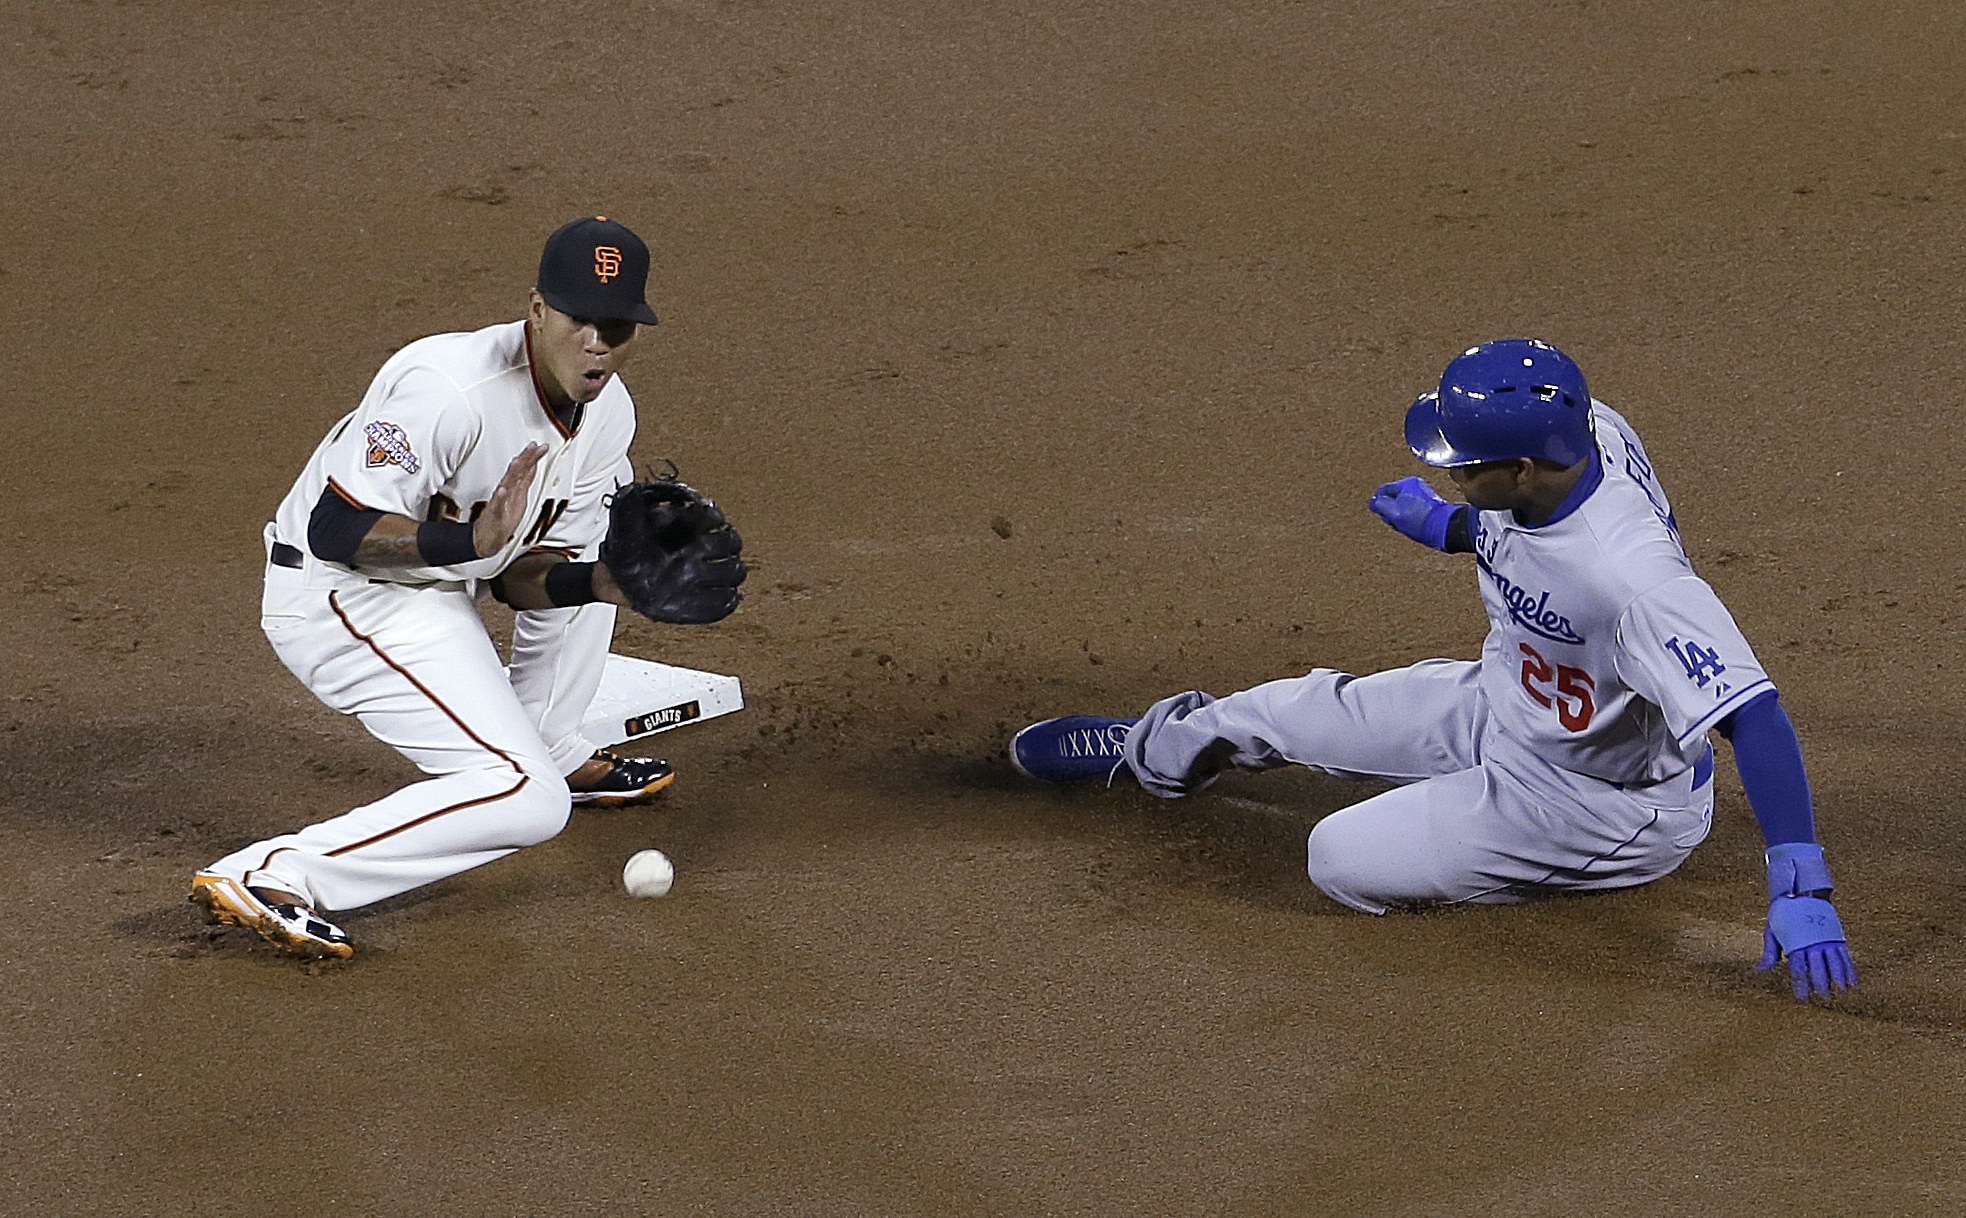 Los Angeles Dodgers' Carl Crawford (right) steals second base next to San Francisco Giants shortstop Ehire Adrianza during the first inning of a baseball game in San Francisco on Tuesday. Photo: AP